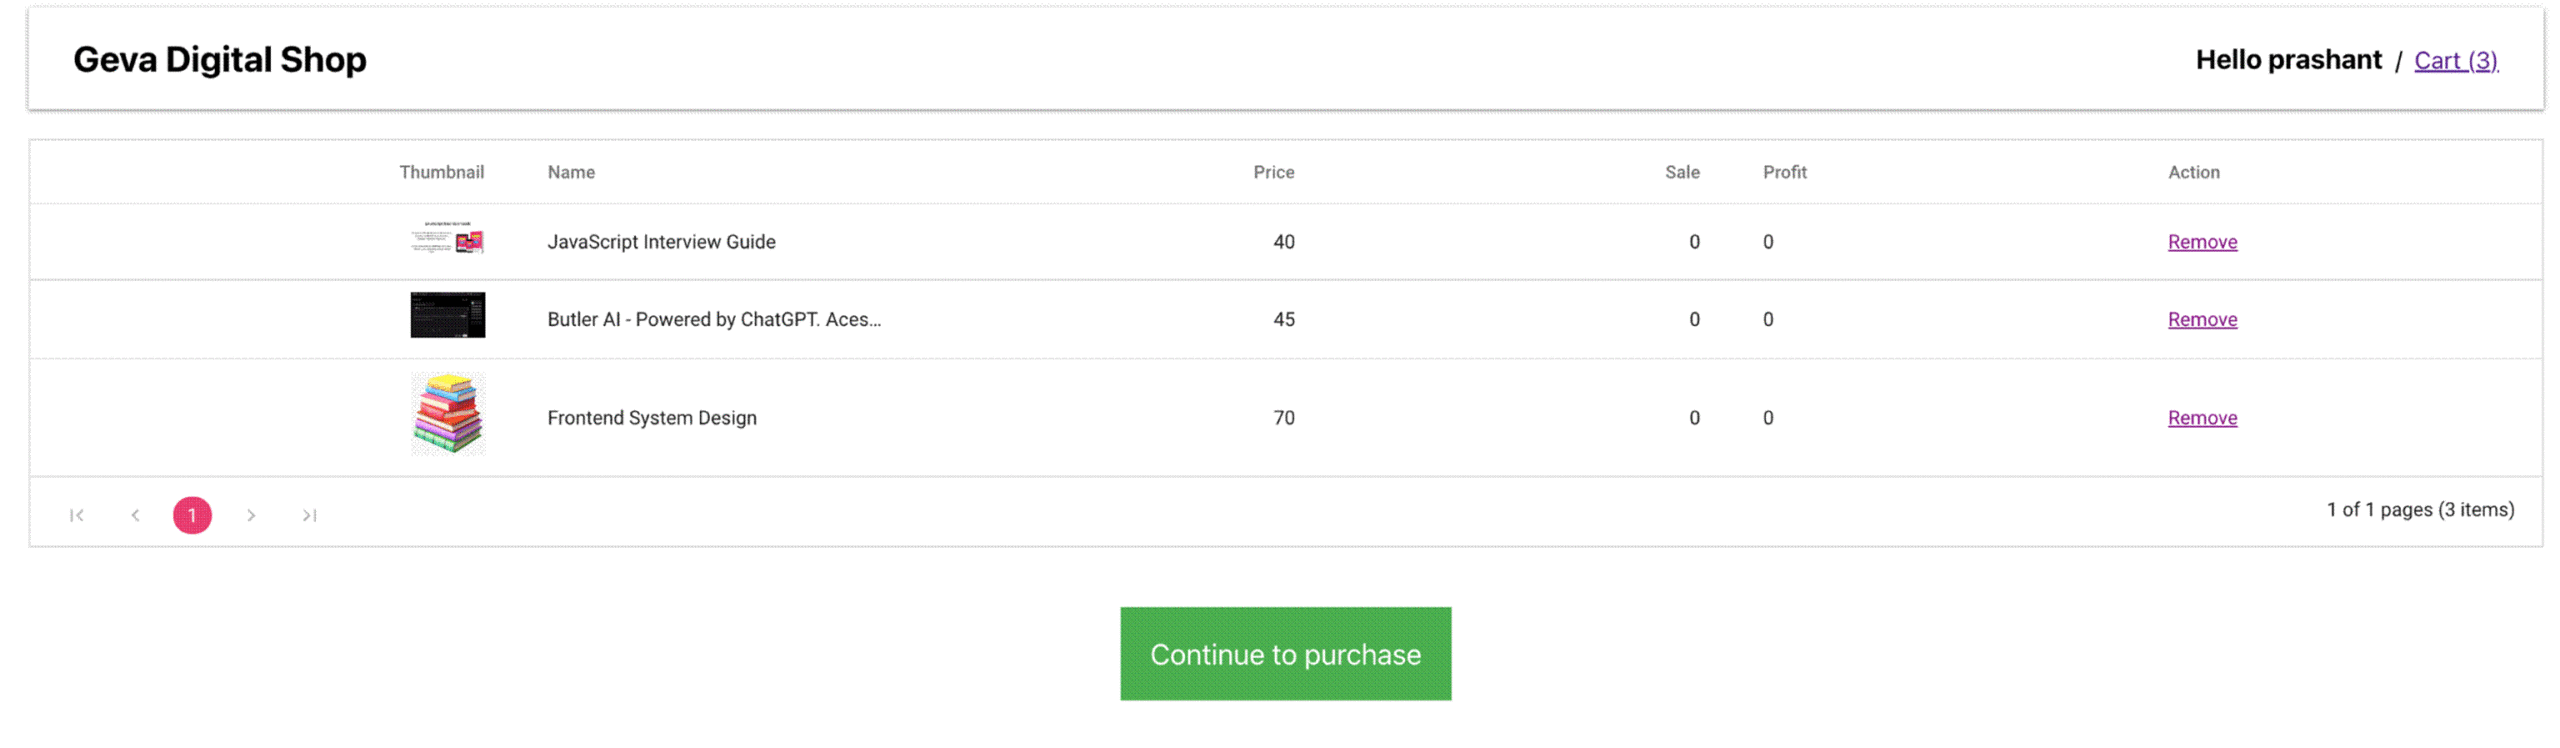 Cart-after-login page in the React e-commerce app